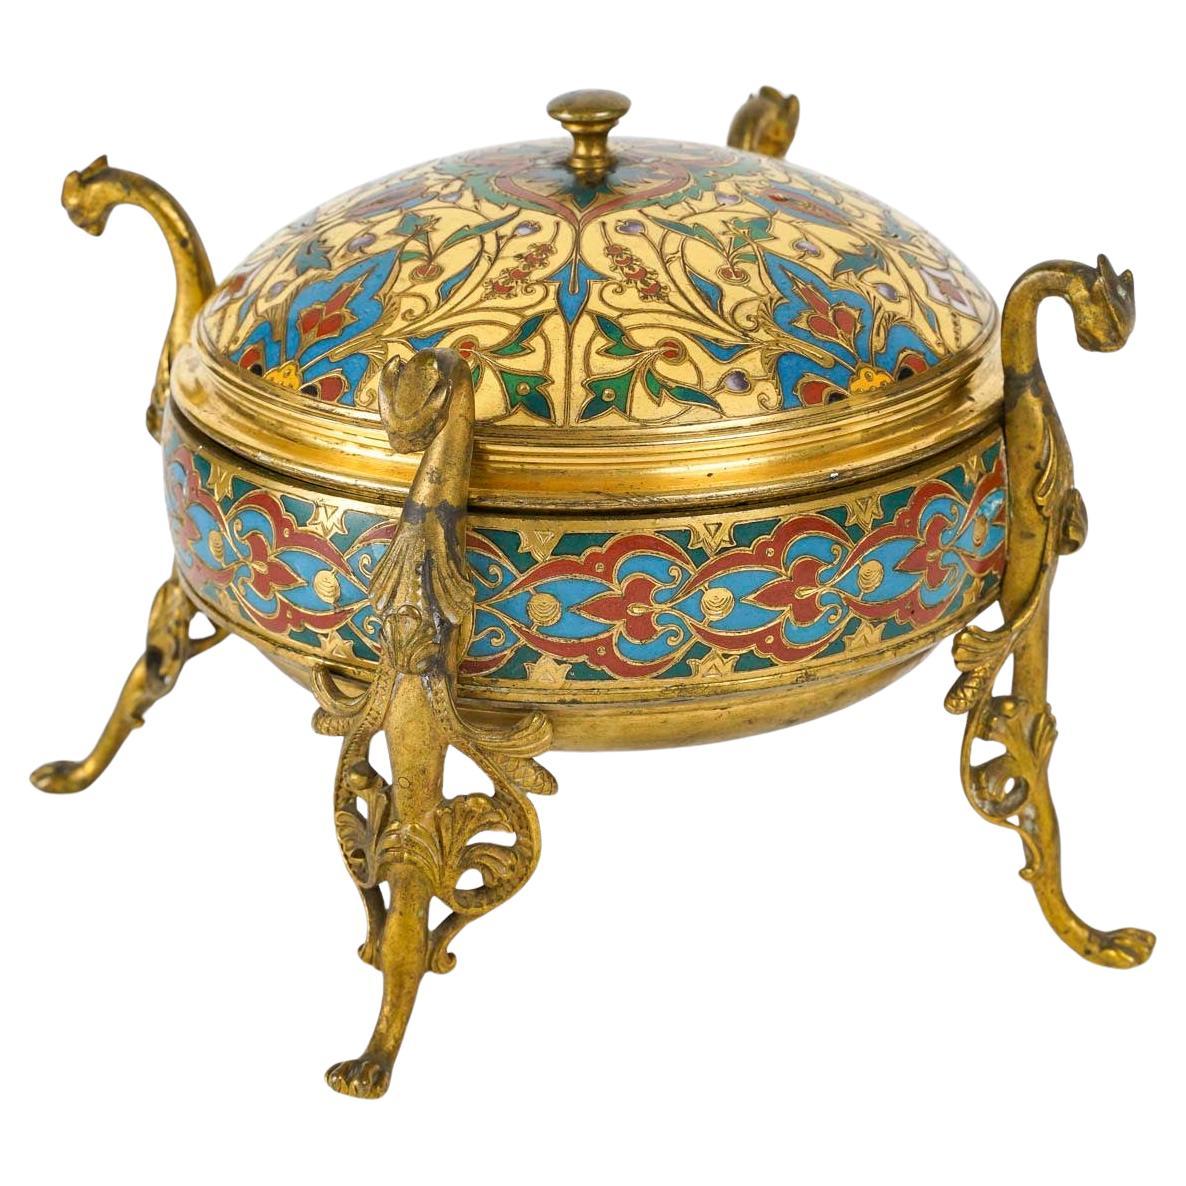 Enamelled Bronze Box, Signed F. Barbedienne, 19th Century, Napoleon III Period.